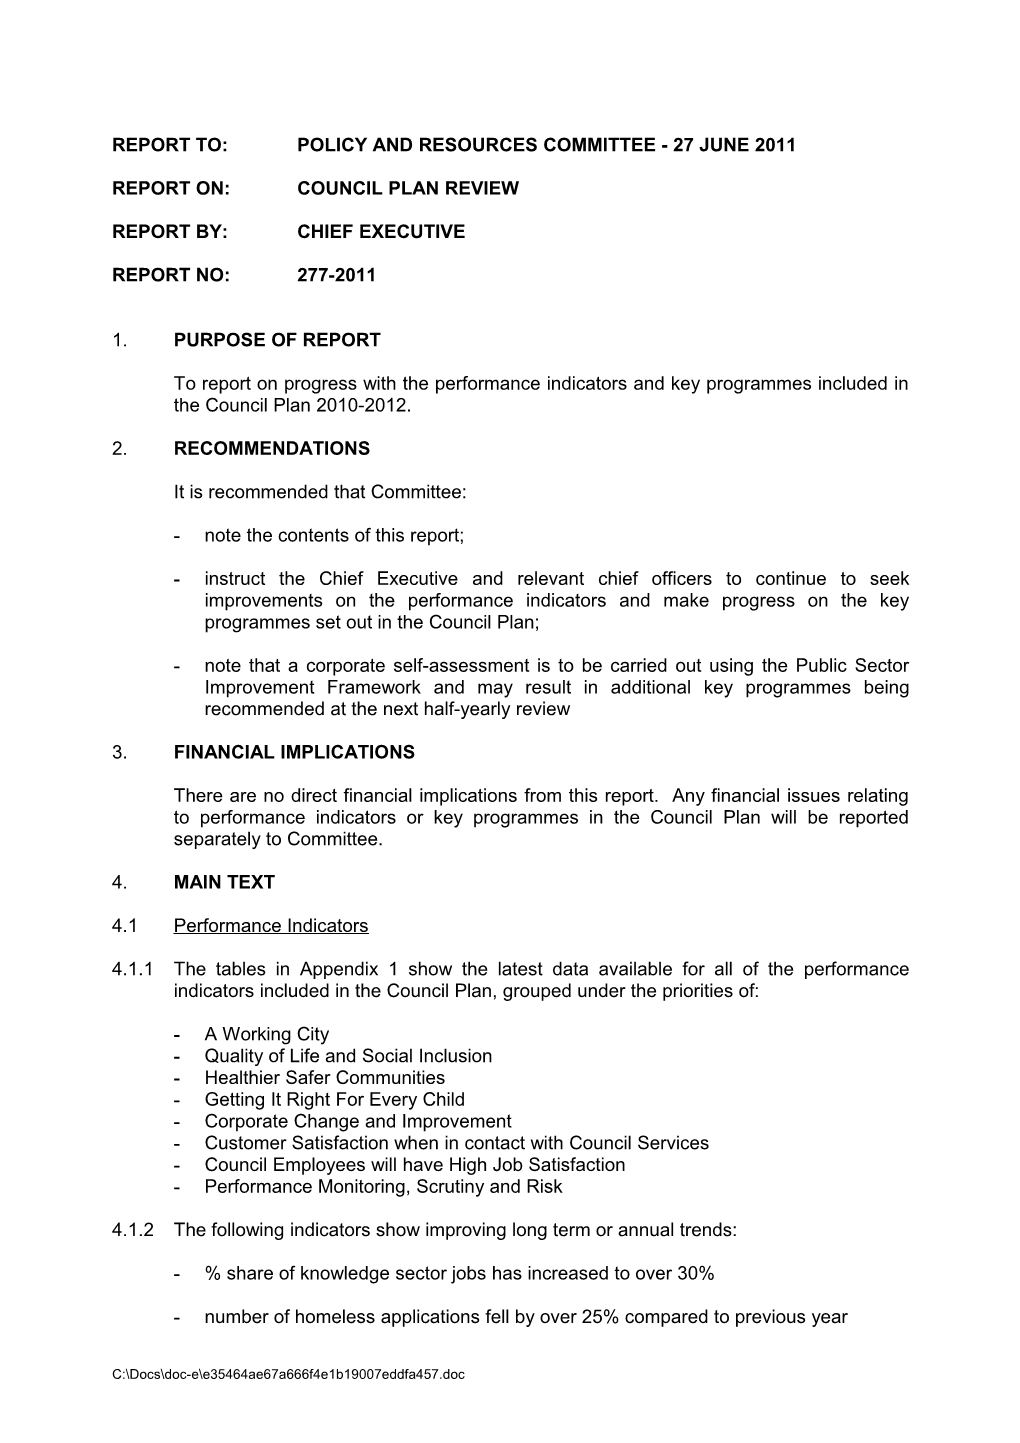 Report To:Policy and Resources Committee - 27 June 2011